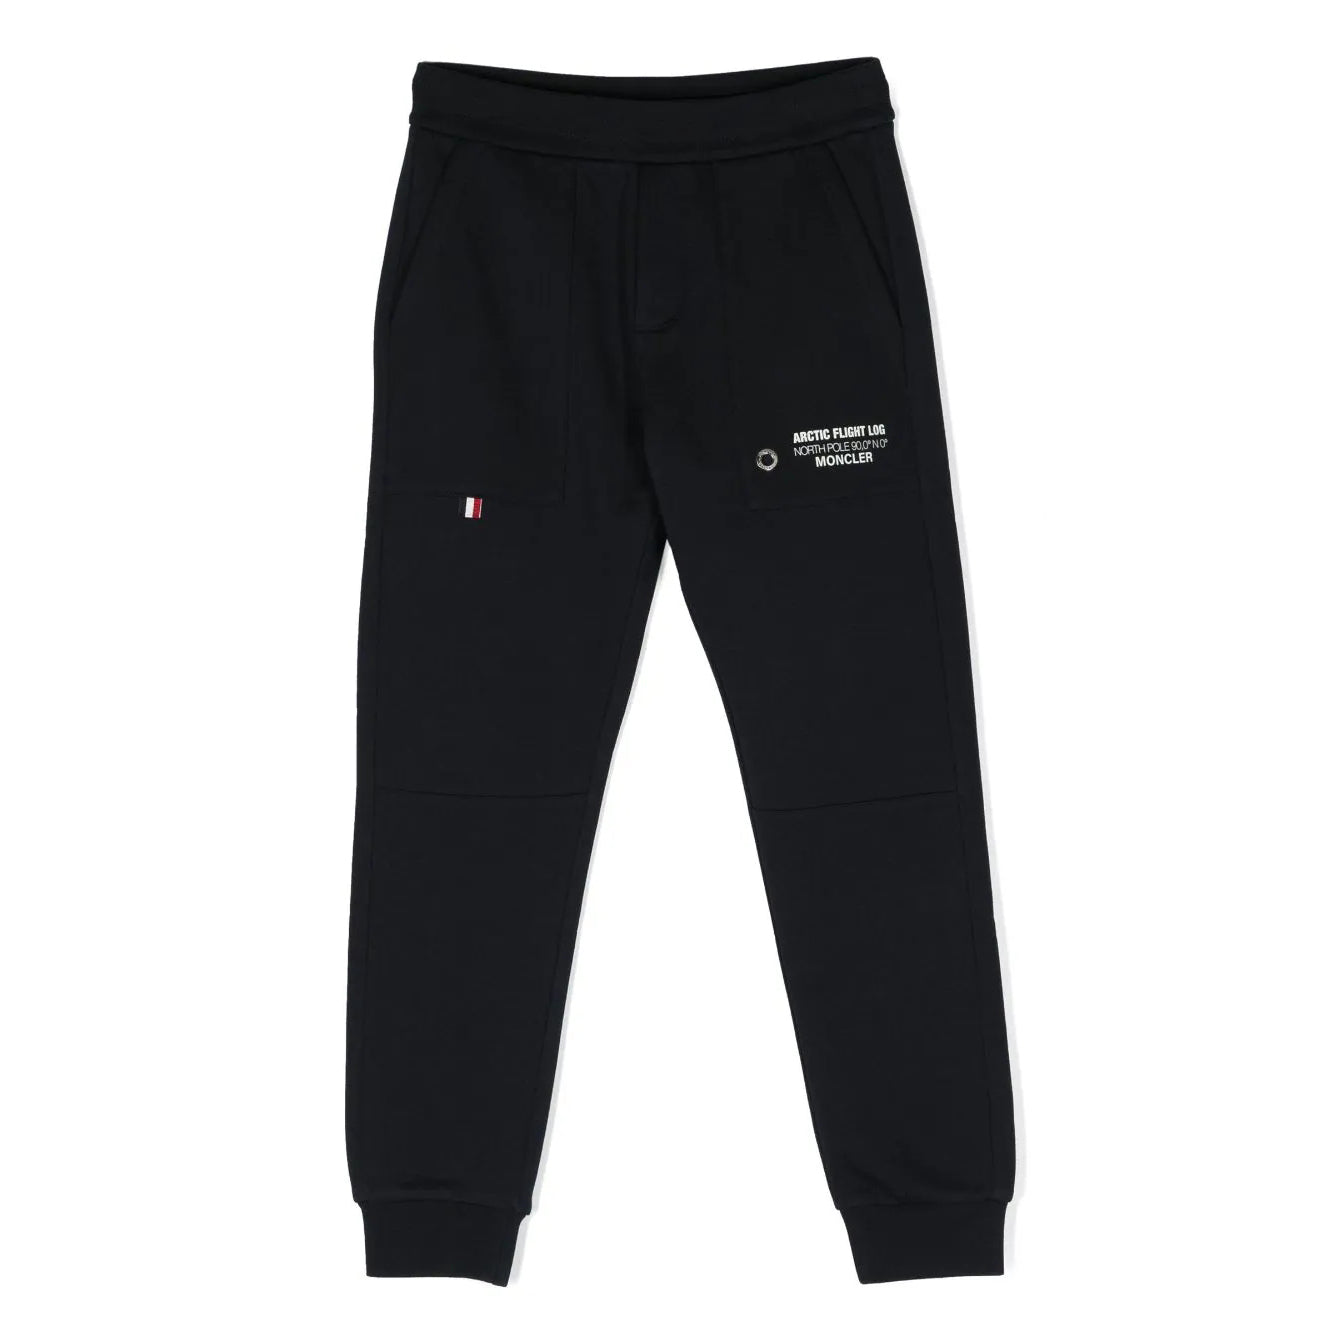 Boys Navy Cotton Trousers